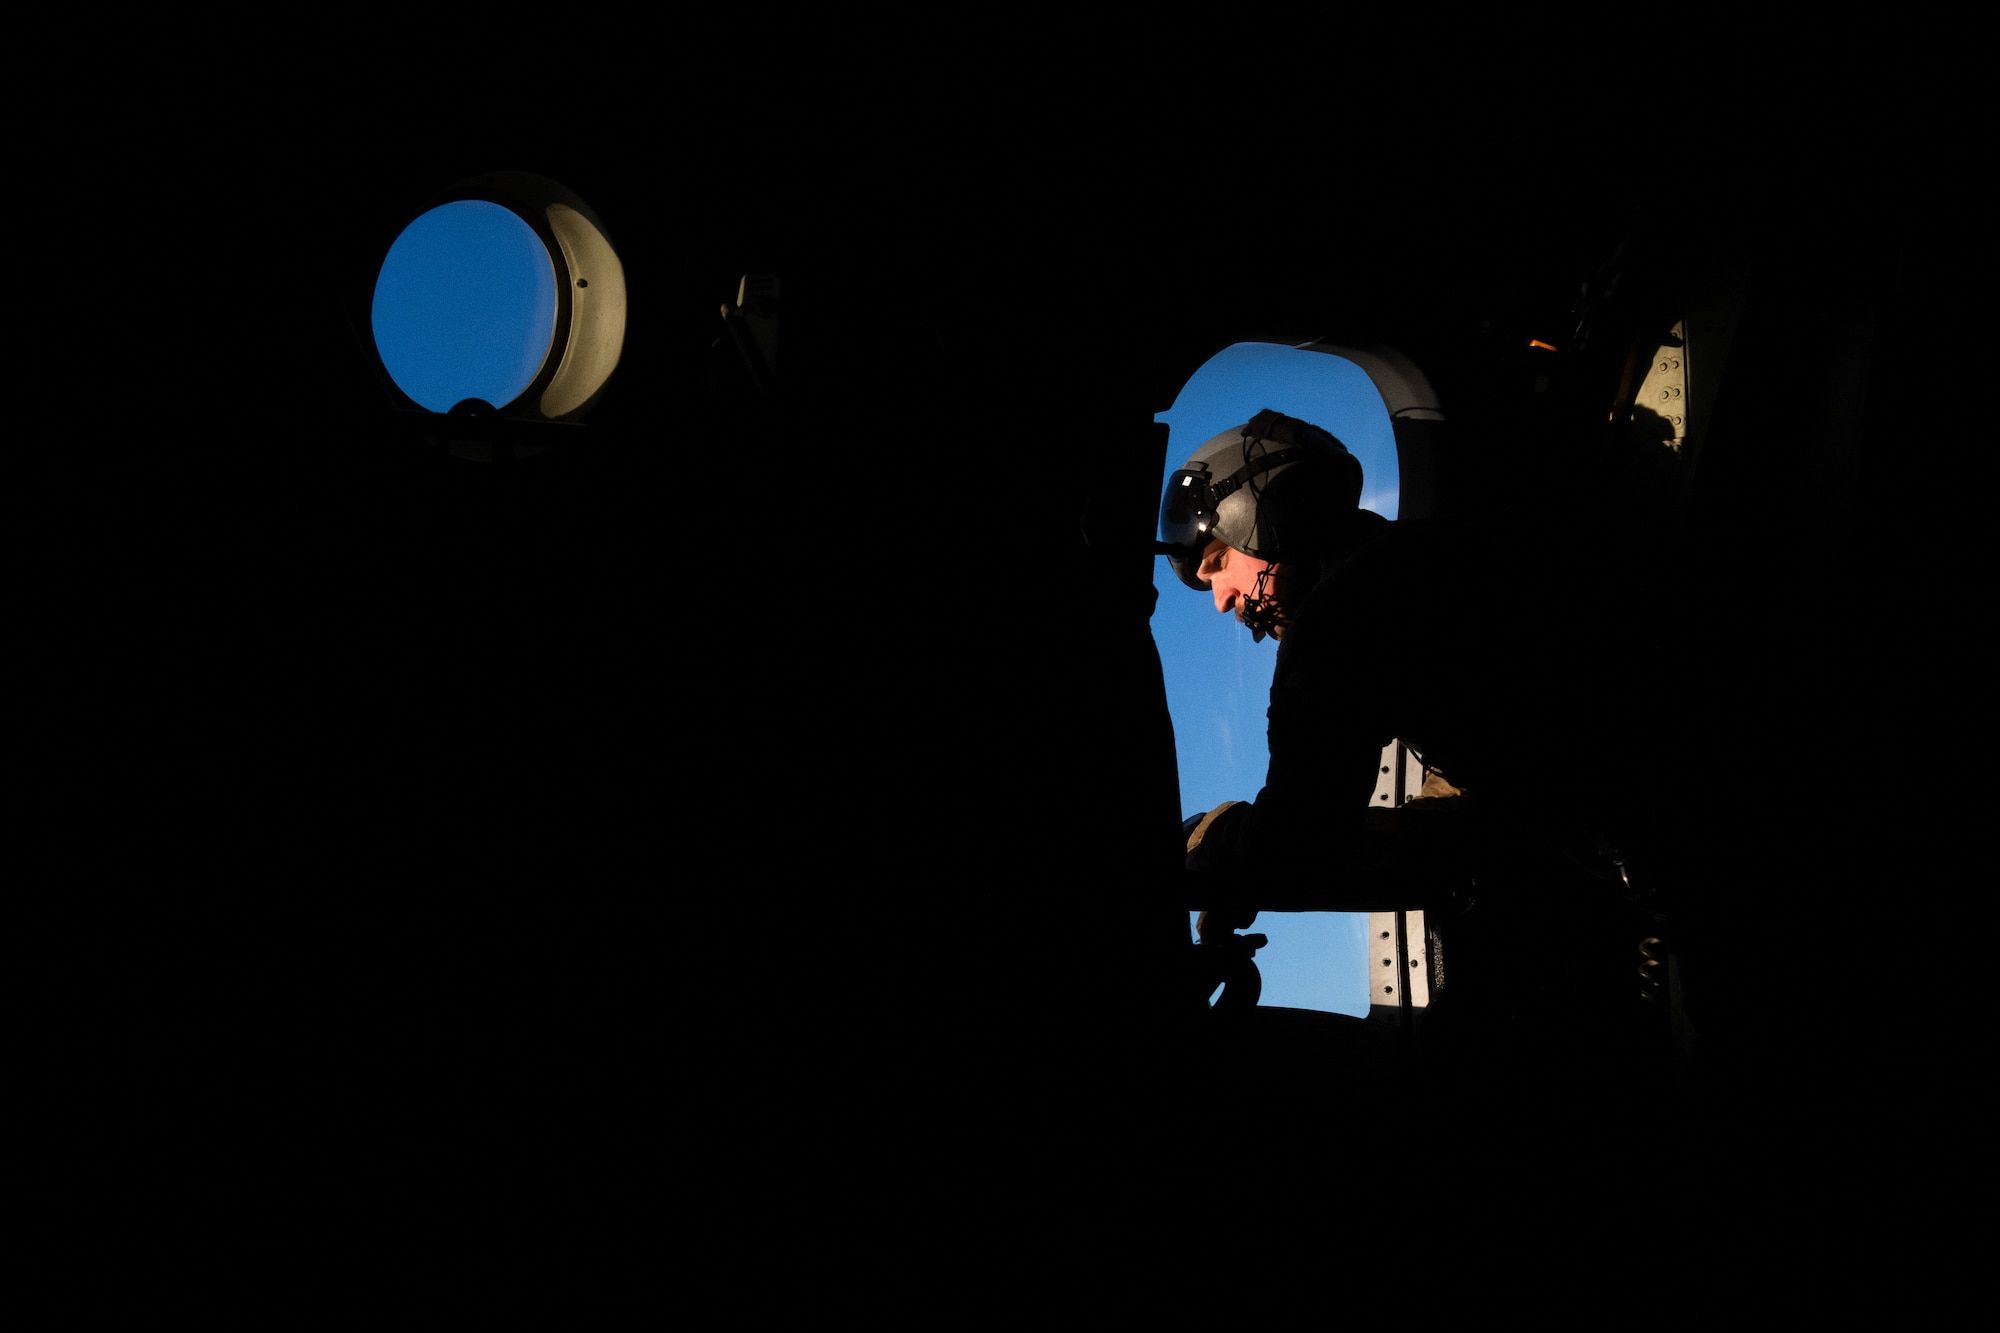 U.S. Air Force Staff Sgt. Todd Truran, 71st Rescue Squadron instructor loadmaster, looks out the bubble door of an HC130J Combat King II during Exercise Ready Tiger 24-1 at Savannah Air National Guard Base, Georgia, April 12, 2024. Throughout the exercise, aircrew simulated real-world responses to combat search and rescue missions. During Ready Tiger 24-1, exercise inspectors will assess the 23rd Wing's proficiency in employing decentralized command and control to fulfill air tasking orders across geographically dispersed areas amid communication challenges, integrating Agile Combat Employment principles such as integrated combat turns, forward aerial refueling points, multi-capable Airmen, and combat search and rescue capabilities. (U.S. Air Force photo by Senior Airman Courtney Sebastianelli)